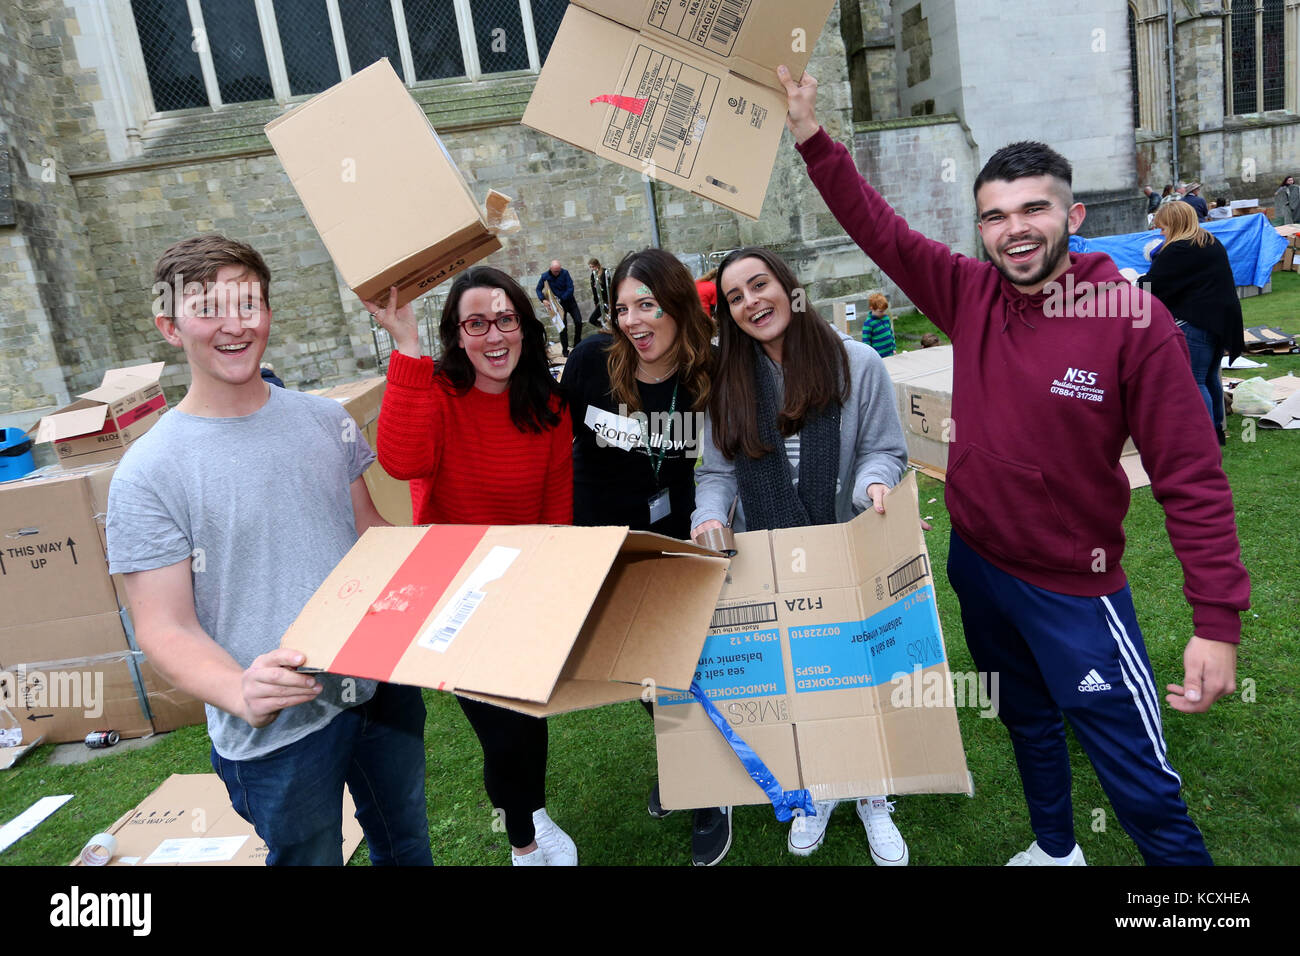 The Big Sleepout at Chichester Cathedral, West Sussex, UK. An annual event to raise money for homeless charity Stonepillow. Stock Photo